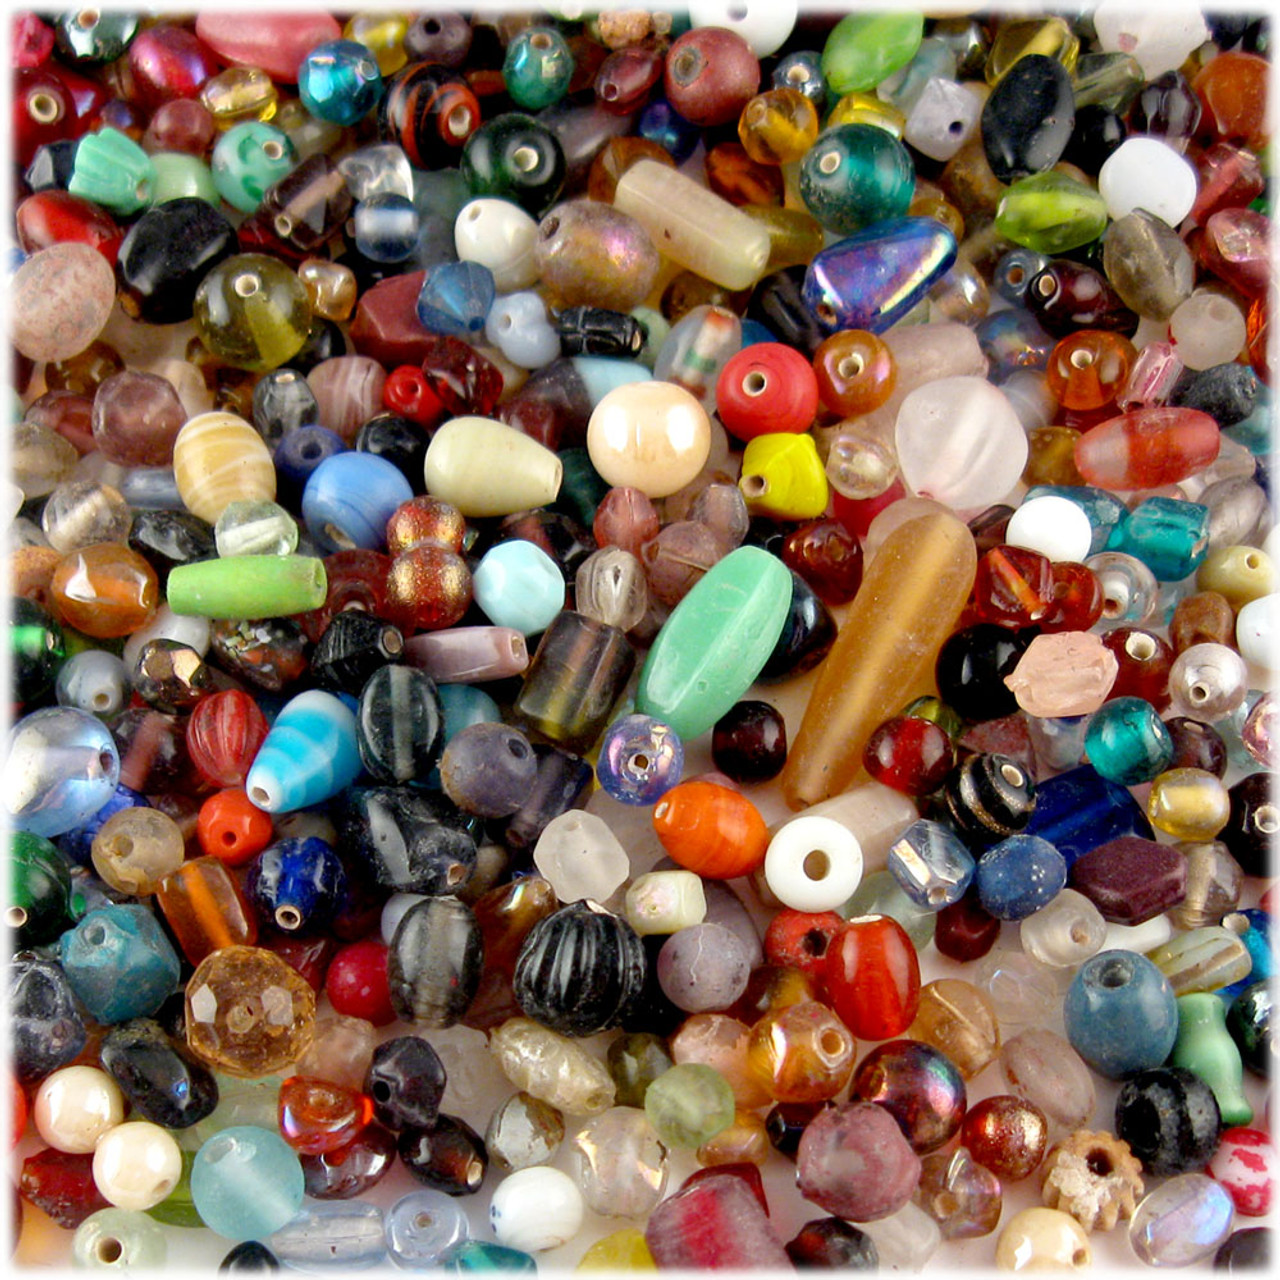 The Beadsmith Box of Beads, Bead Assortment, 5-Pound Box of Glass Beads in Assorted Shapes and Sizes, Use for Bracelet Necklace Earrings Jewelry